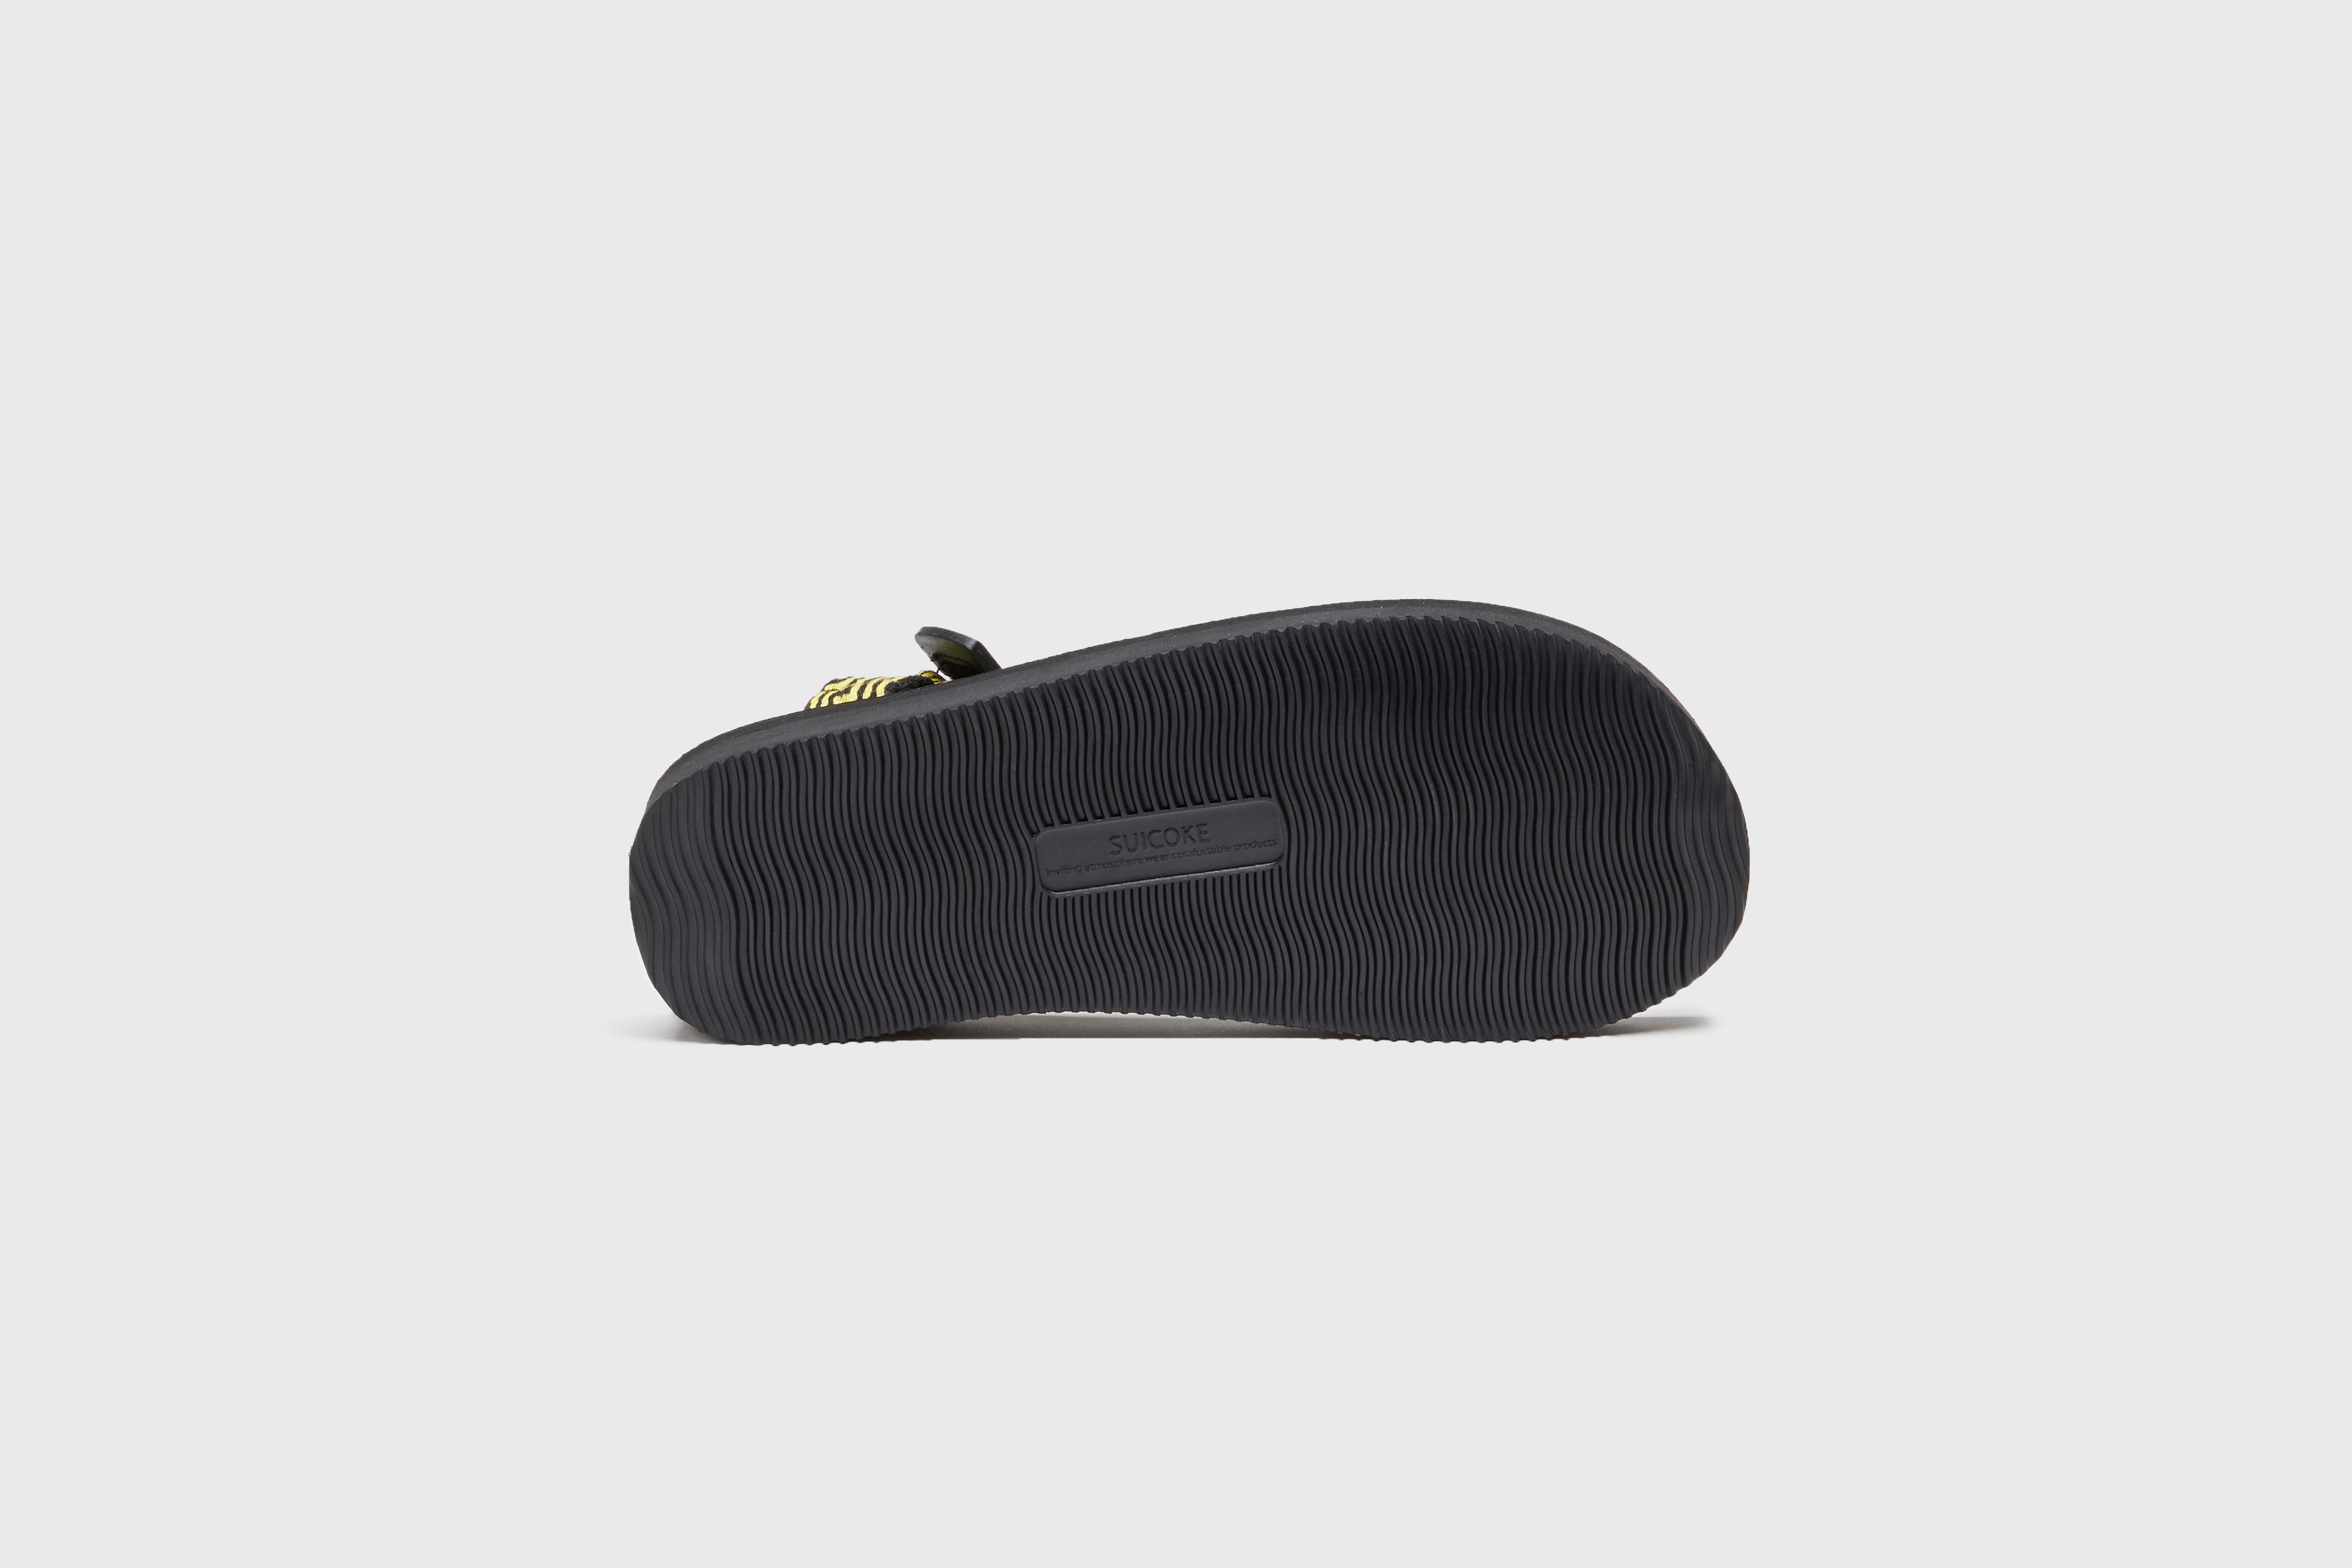 SUICOKE MOTO-Cab-PT05 slides with navy & gray nylon upper, navy & gray midsole and sole, strap and logo patch. From Spring/Summer 2023 collection on eightywingold Web Store, an official partner of SUICOKE. OG-056CAB-PT05 NAVY X GRAY